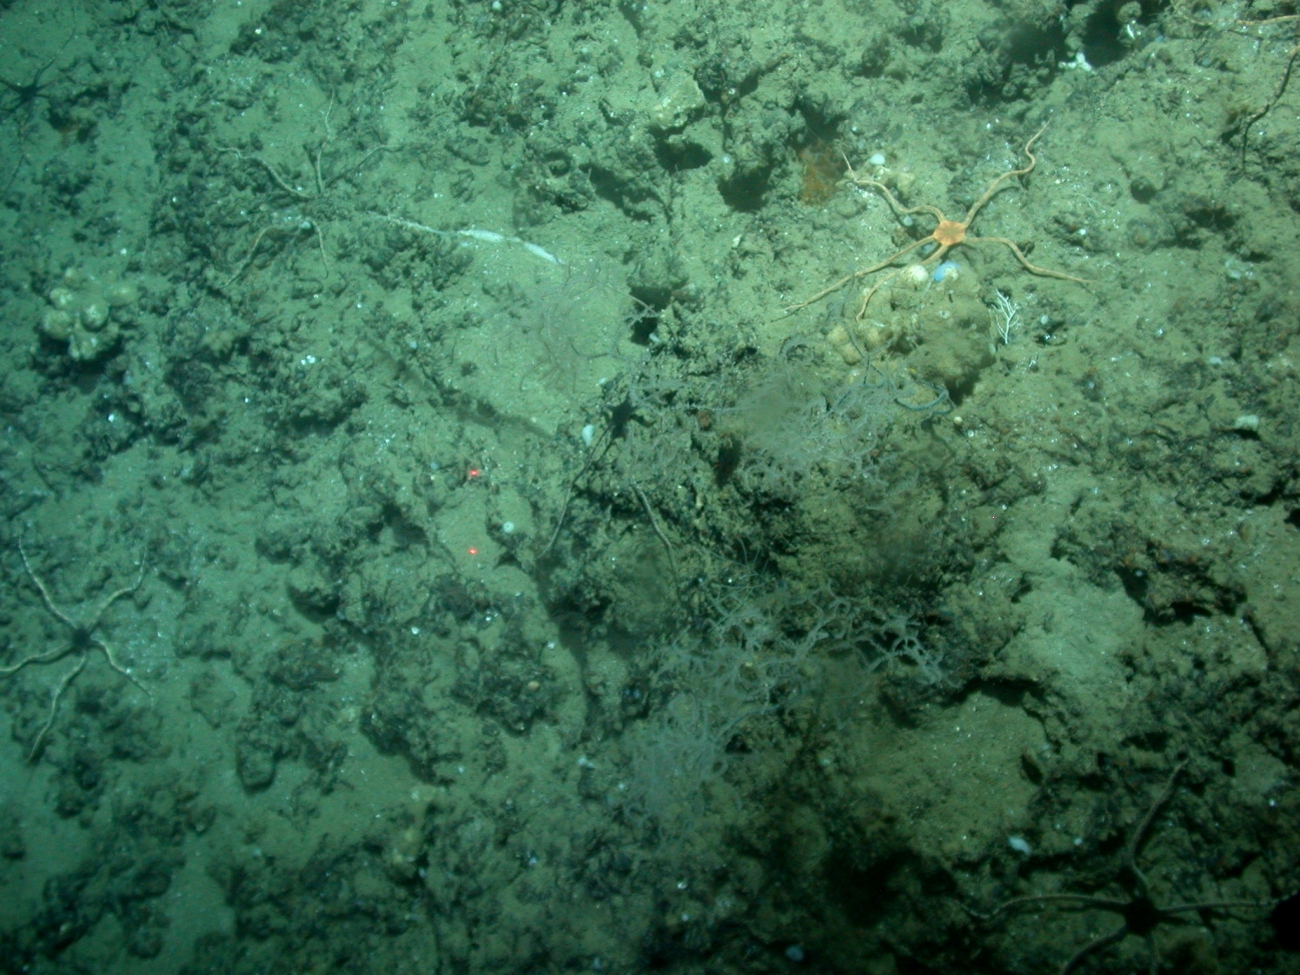 Two different species of brittle stars are apparent in this image, the largeorange star in the upper right, and two or three brittle stars with a blackcentral disk and banded arms